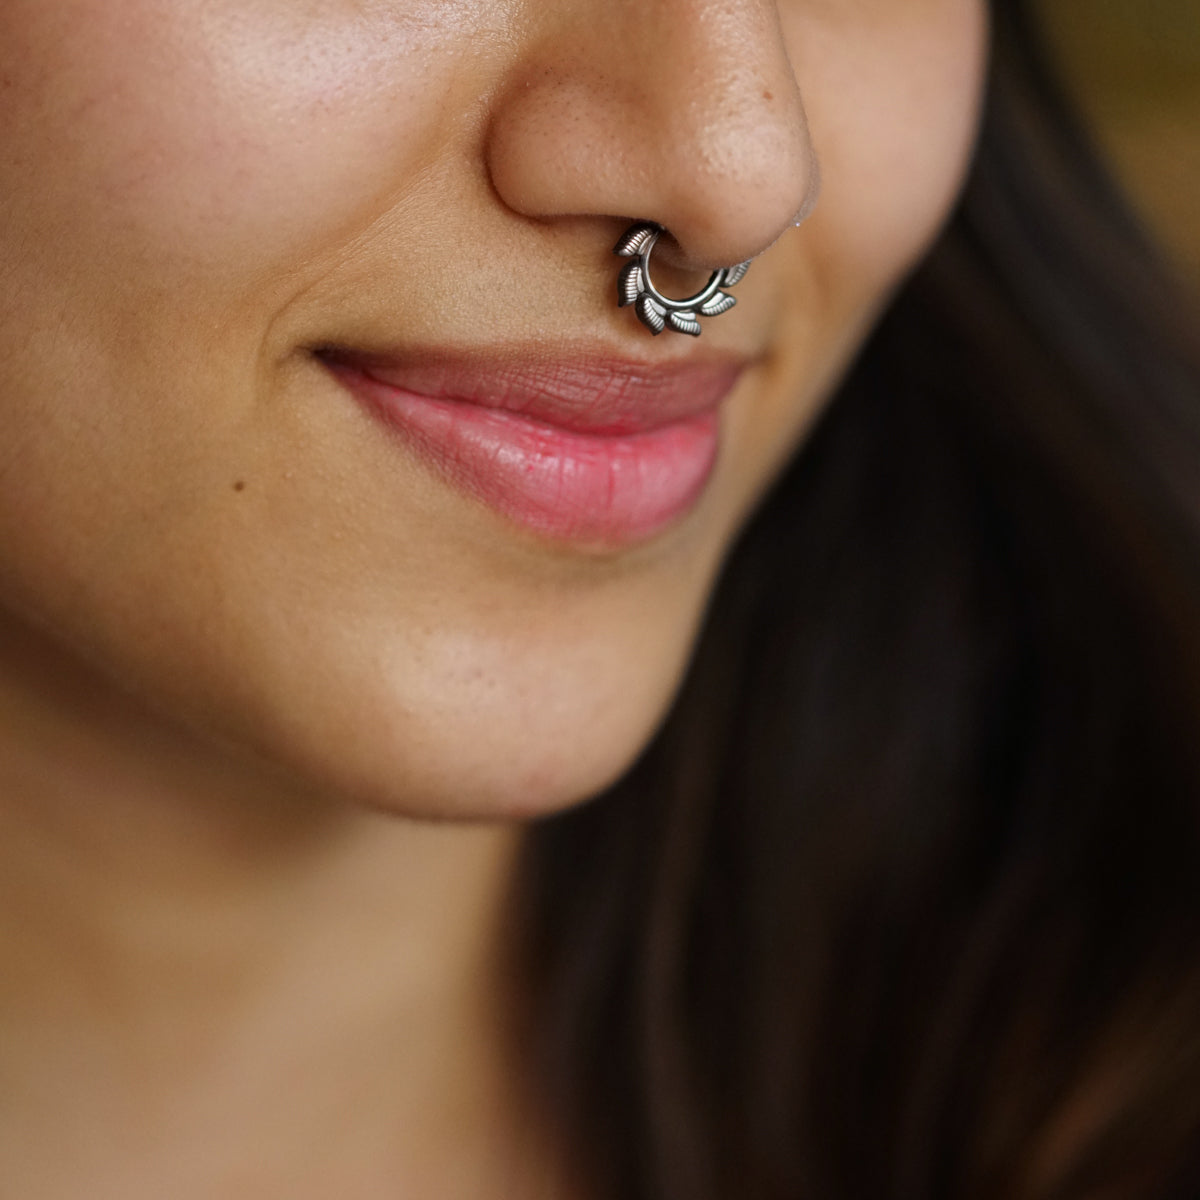 How to a Style Septum Piercing to Match Your Mood | UrbanBodyJewelry.com